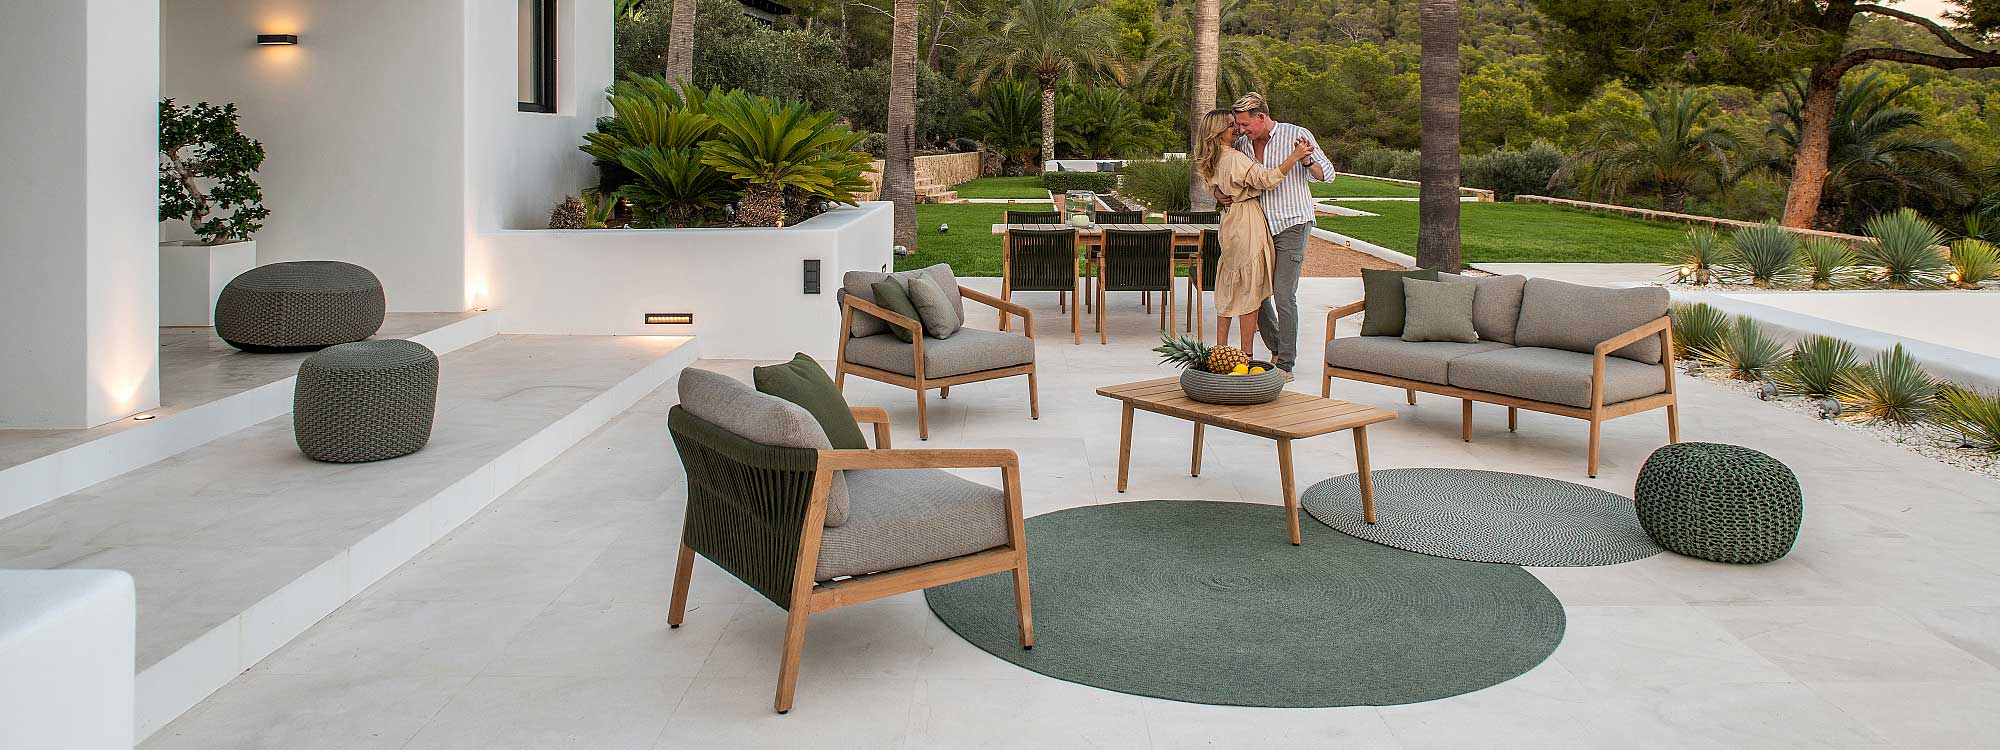 Image of couple dance on expansive terrace at dusk, amongst Ritz teak garden furniture, with lawn and exotic planting in the background